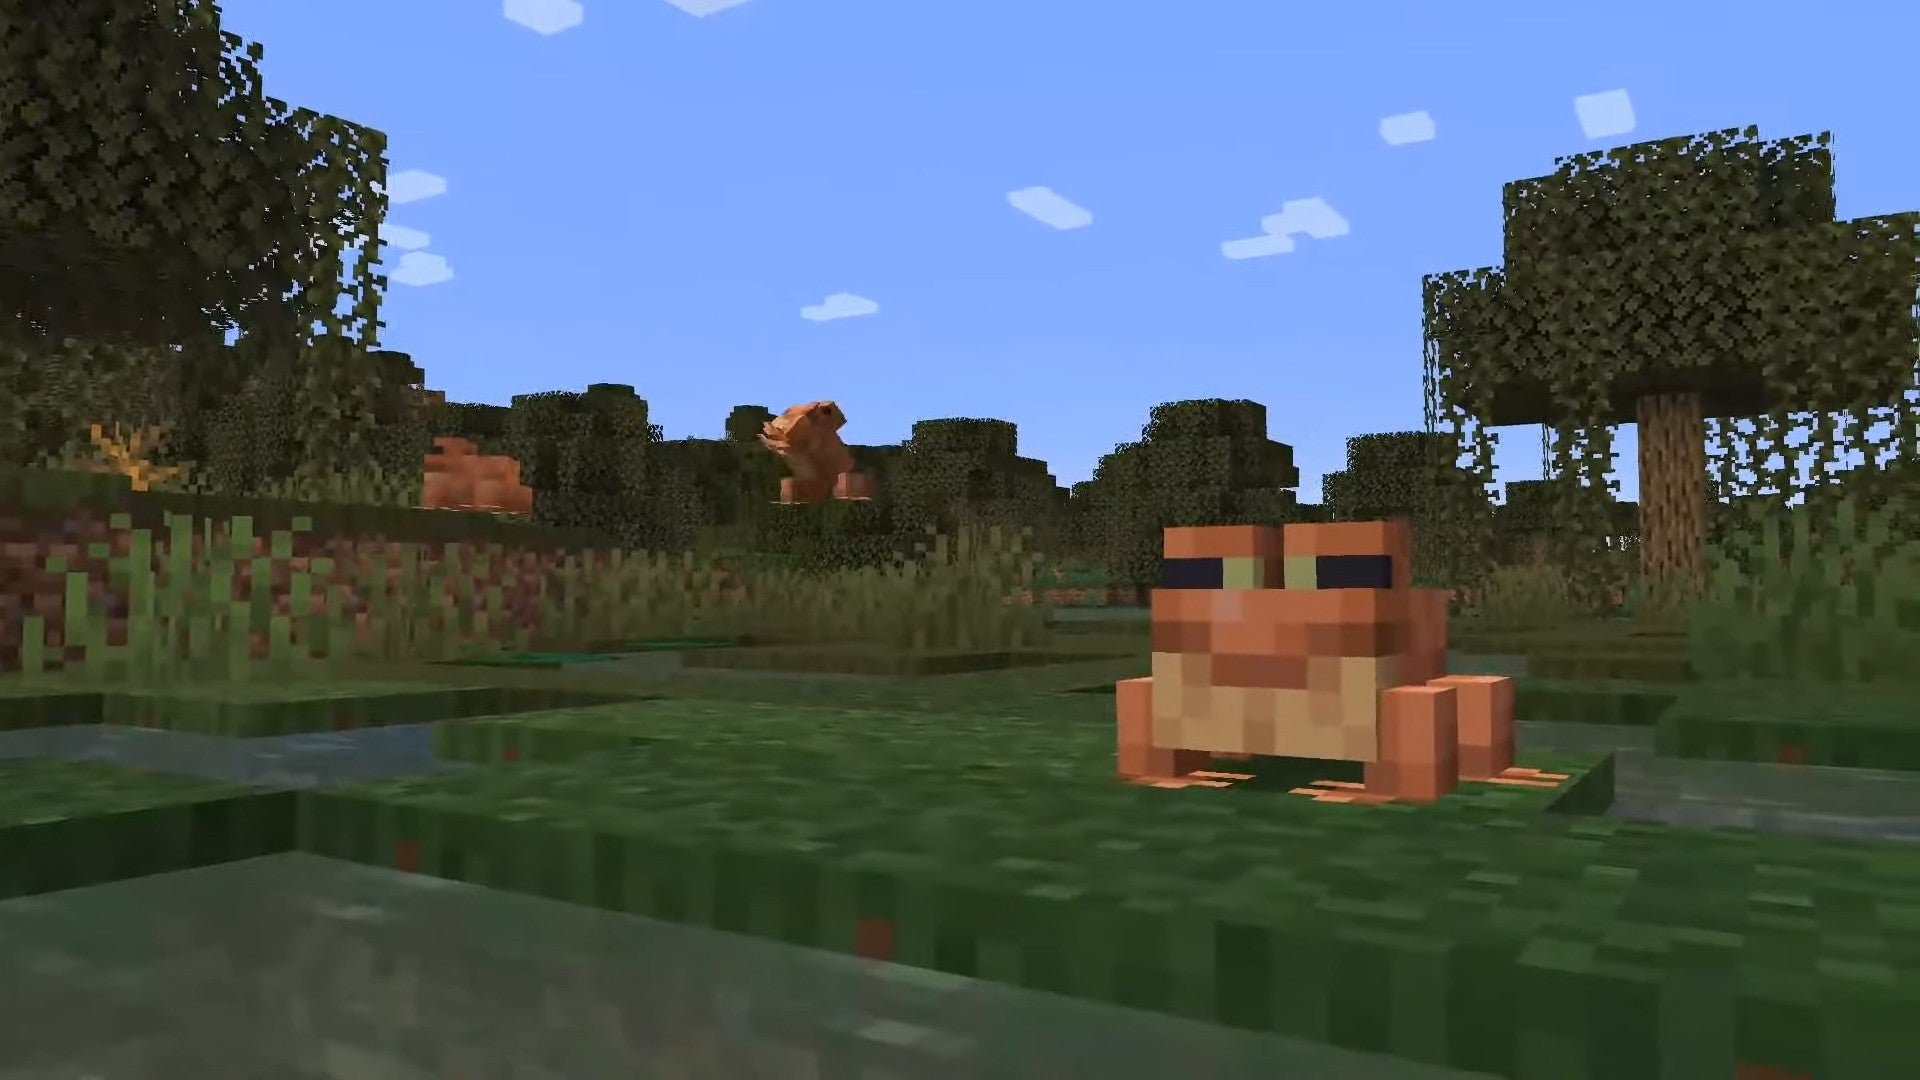 Frog sitting on grass in Minecraft The Wilds